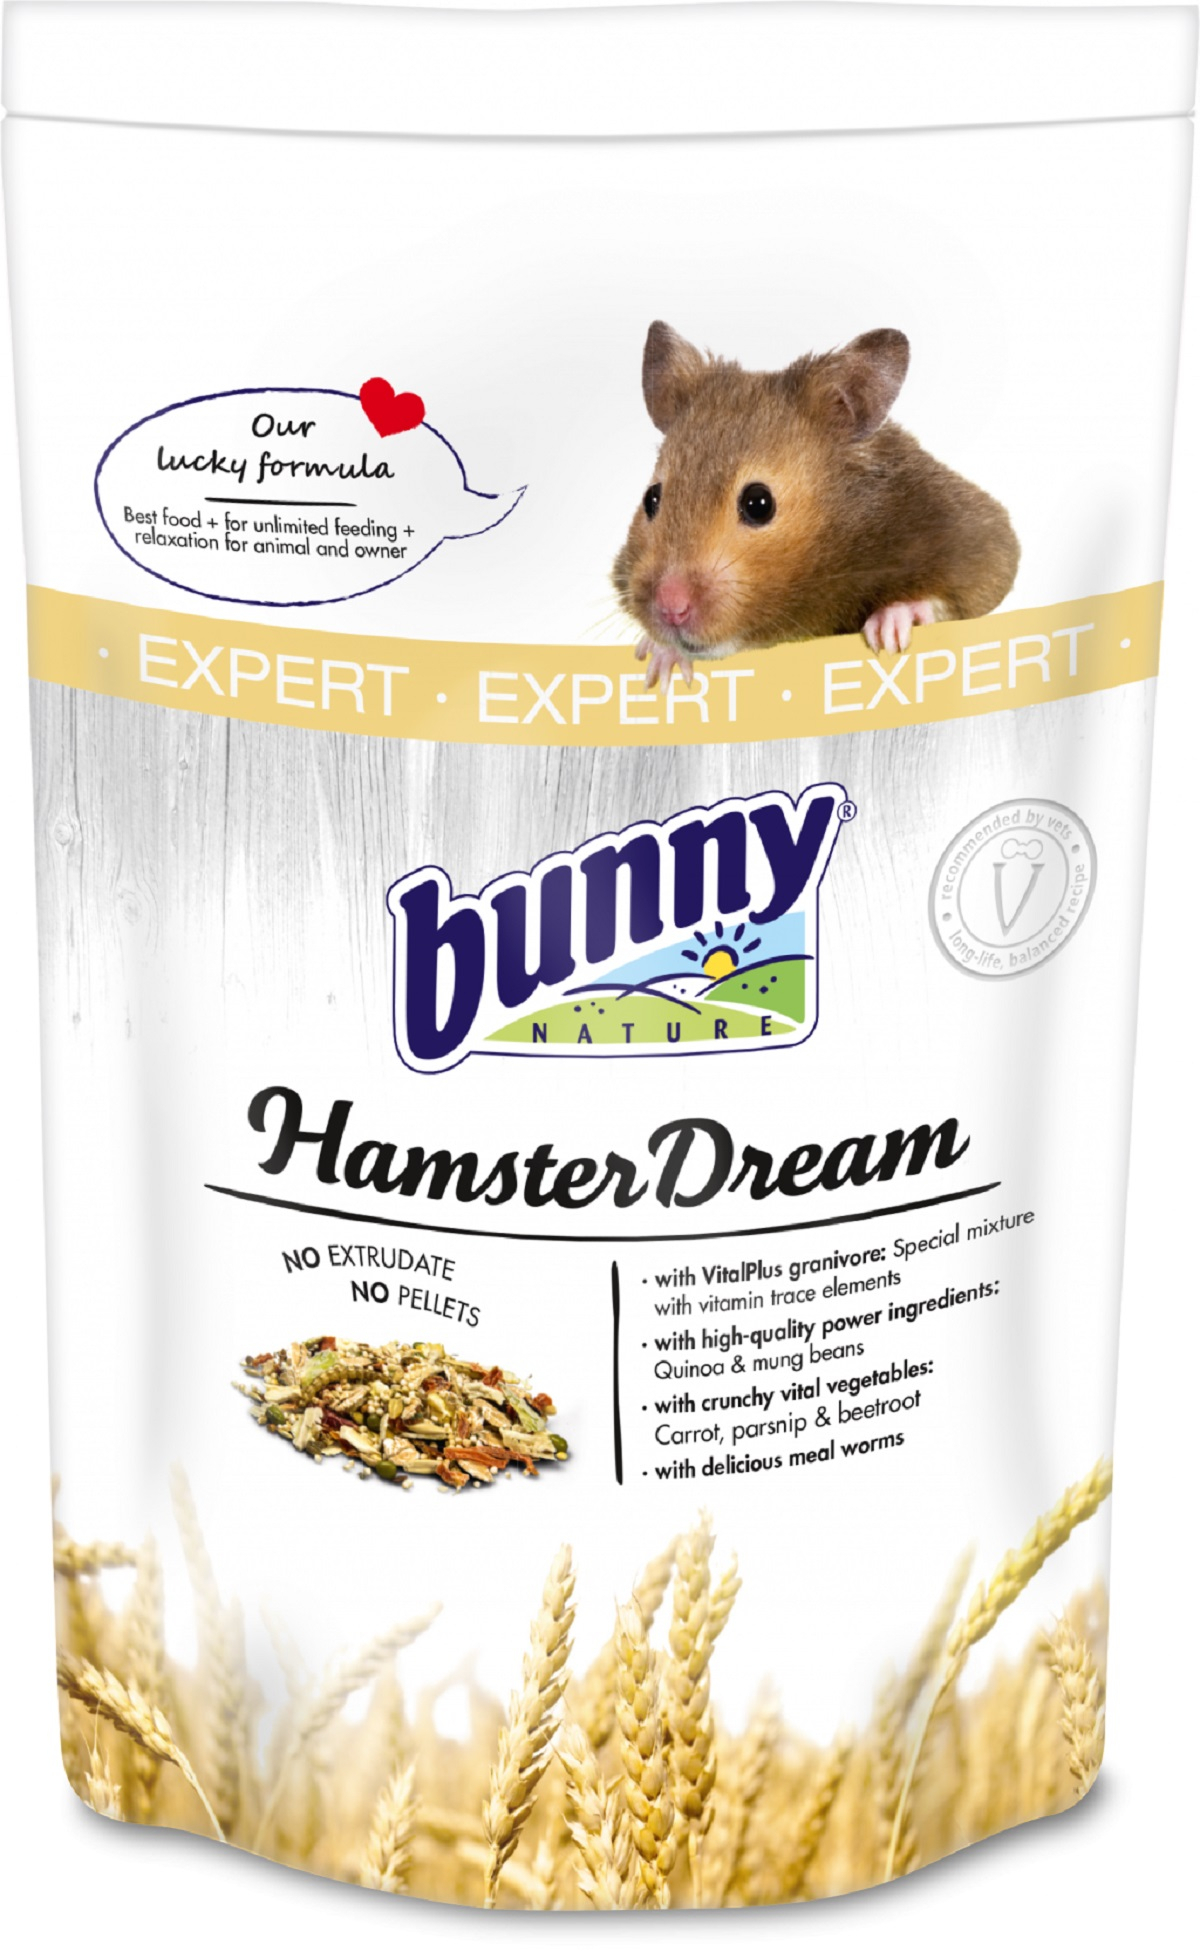 BUNNY HamsterDream Expert - Alimento completo para hamsters